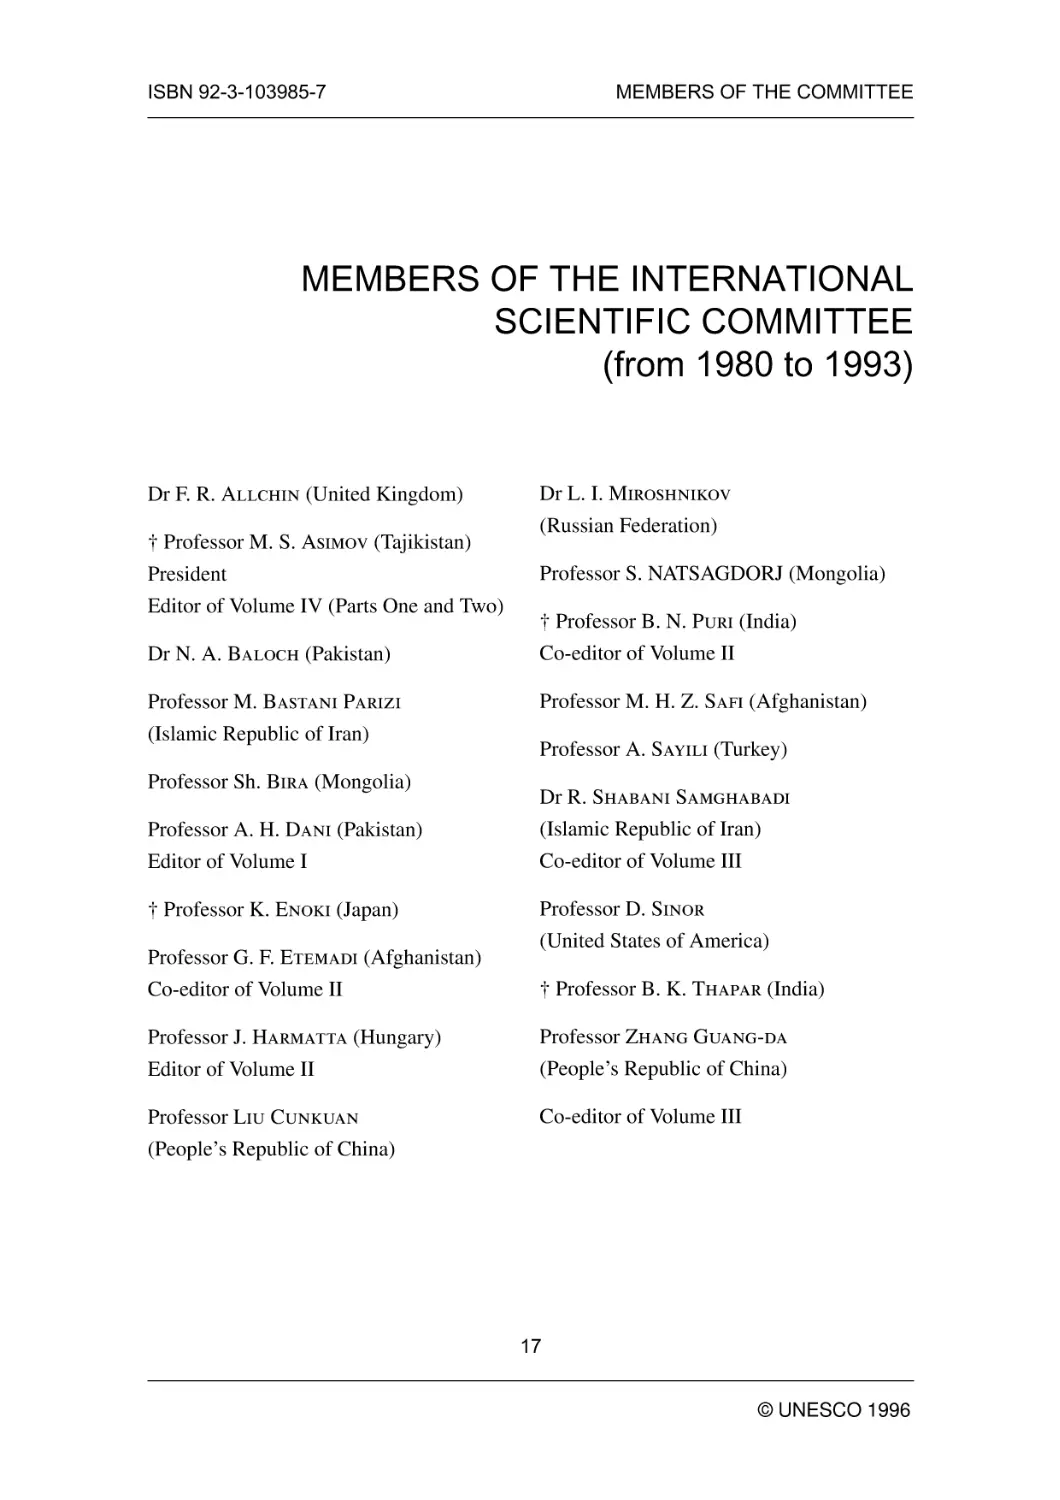 MEMBERS OF THE INTERNATIONAL SCIENTIFIC COMMITTEE (from 1980 to 1993)